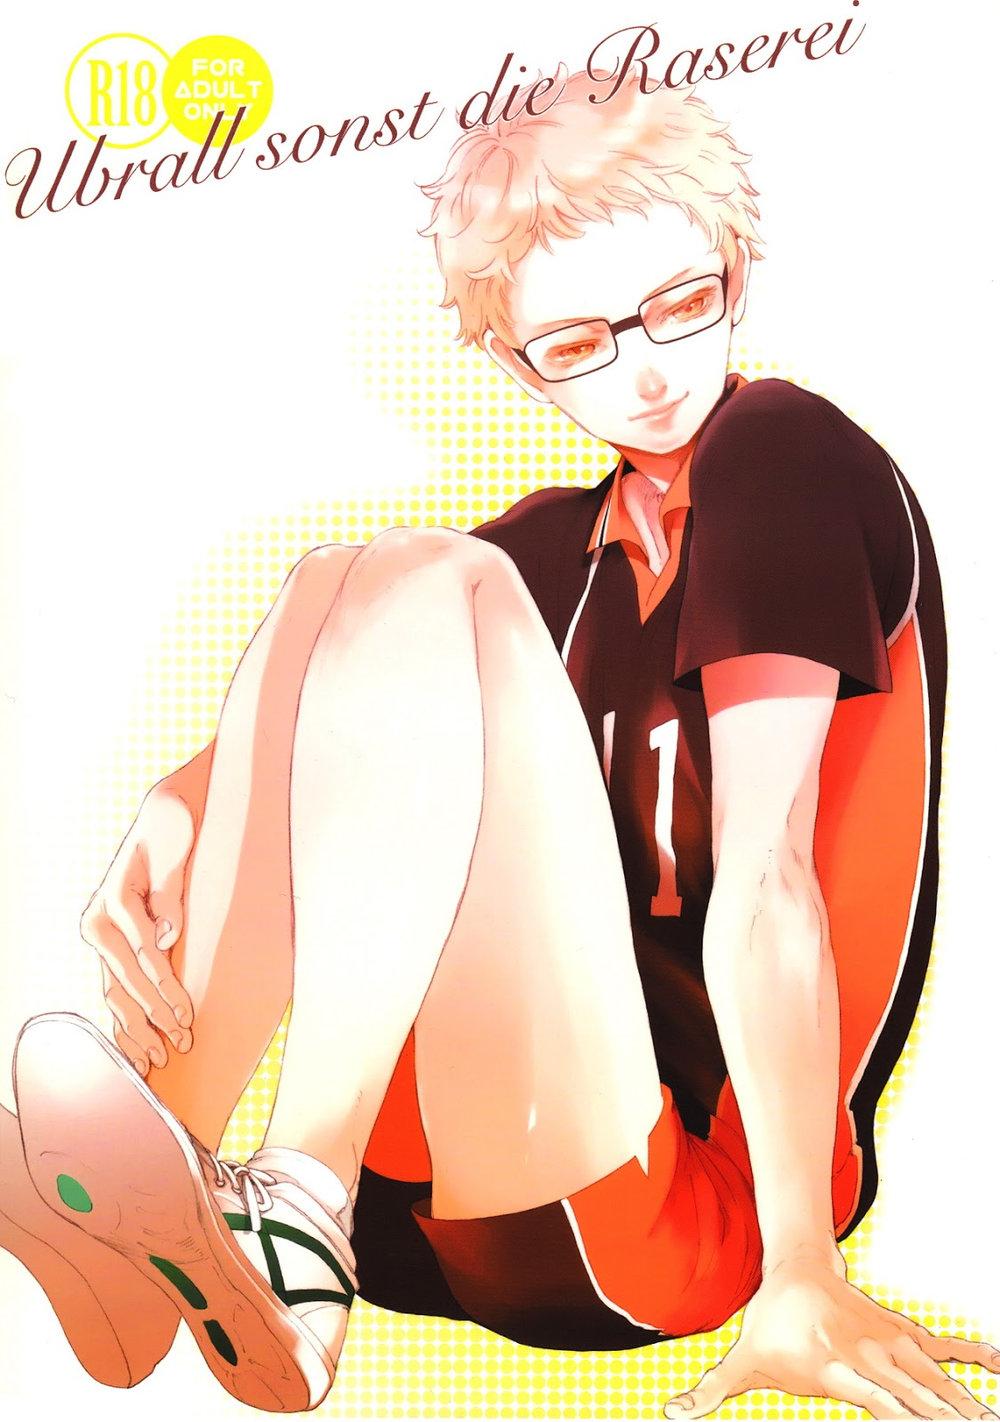 Girl Fuck Ubrall sonst die Raserei - Haikyuu Best Blow Jobs Ever - Picture 1